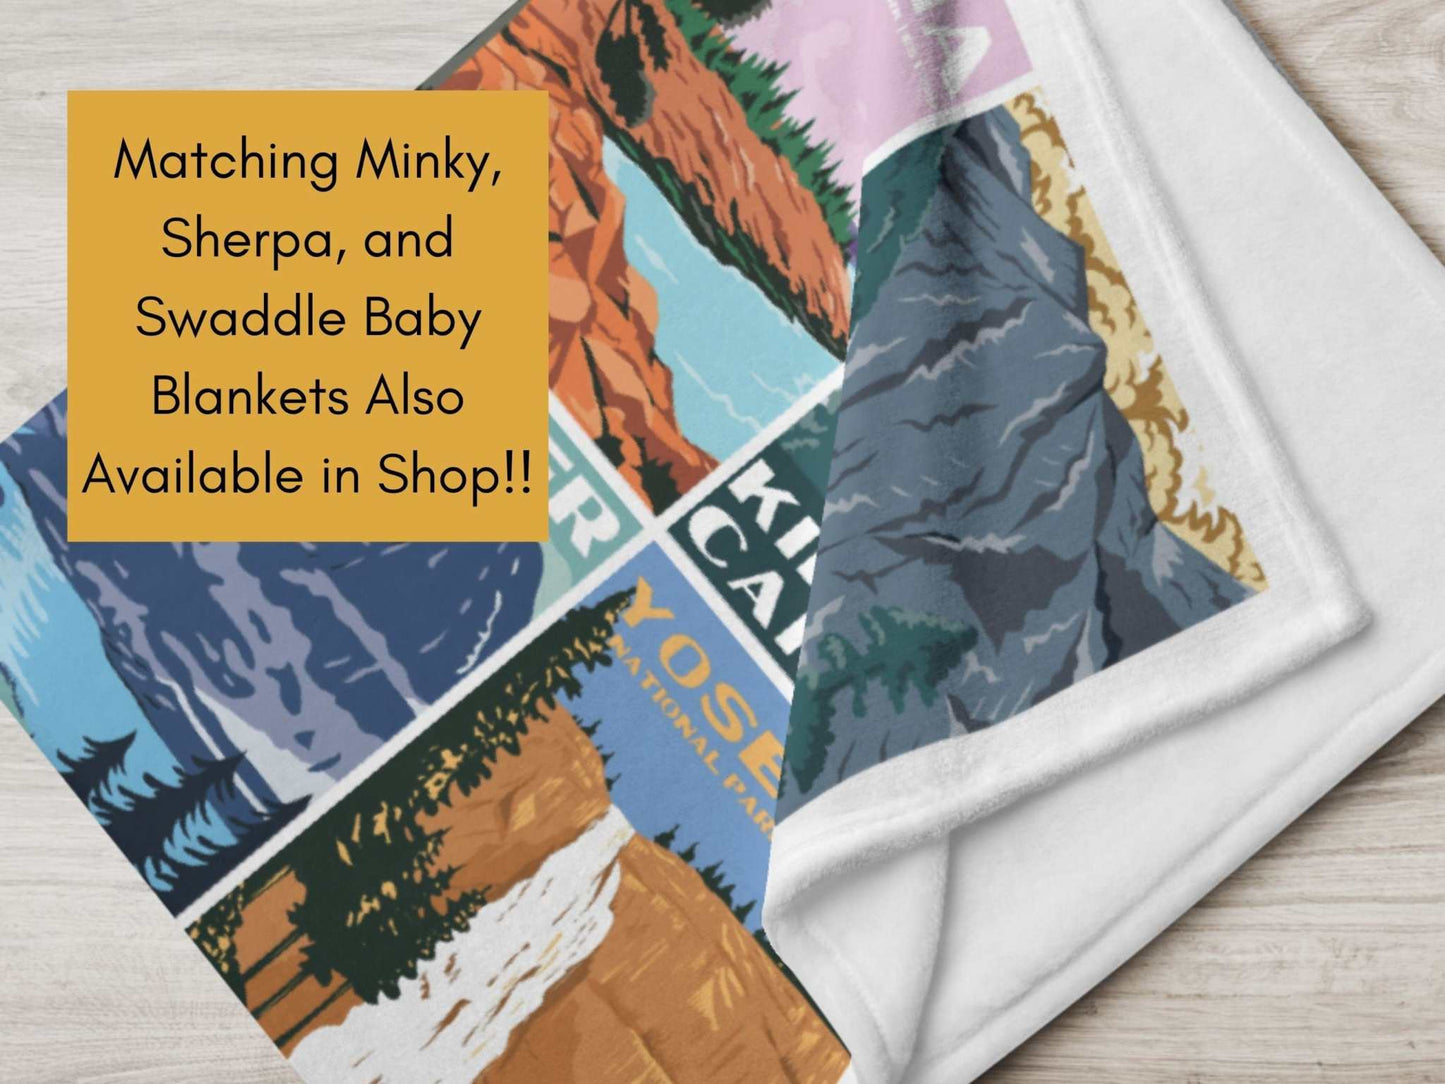 National Park Baby Changing Pad CoverComplete your National Park adventure themed nursery with this baby changing pad cover inspired by vintage National Park posters. The colors are gender neutral and a